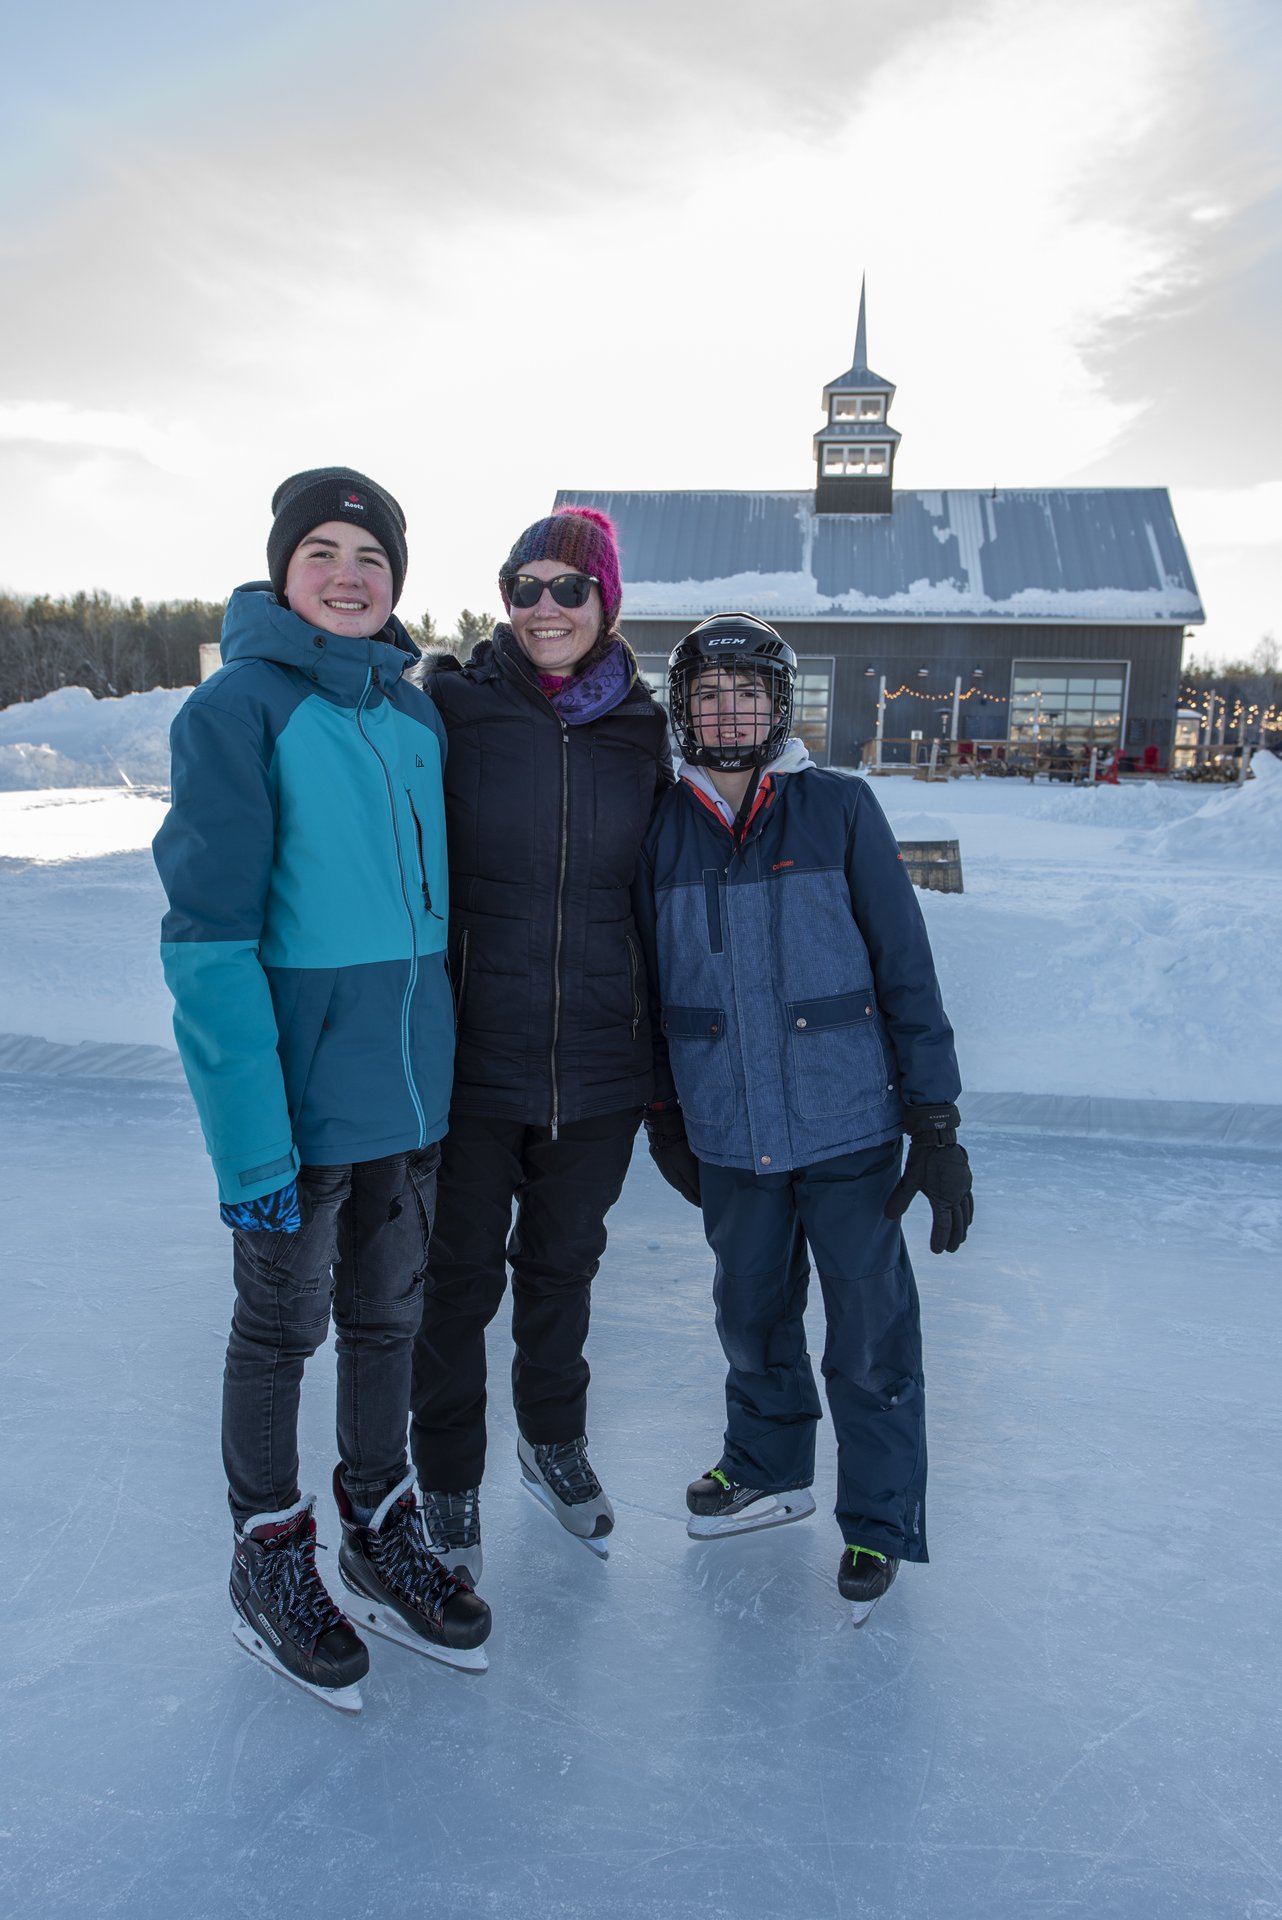 Quayle's Brewery mom and two boys pose smiling on outdoor skating rink in front of the brewery